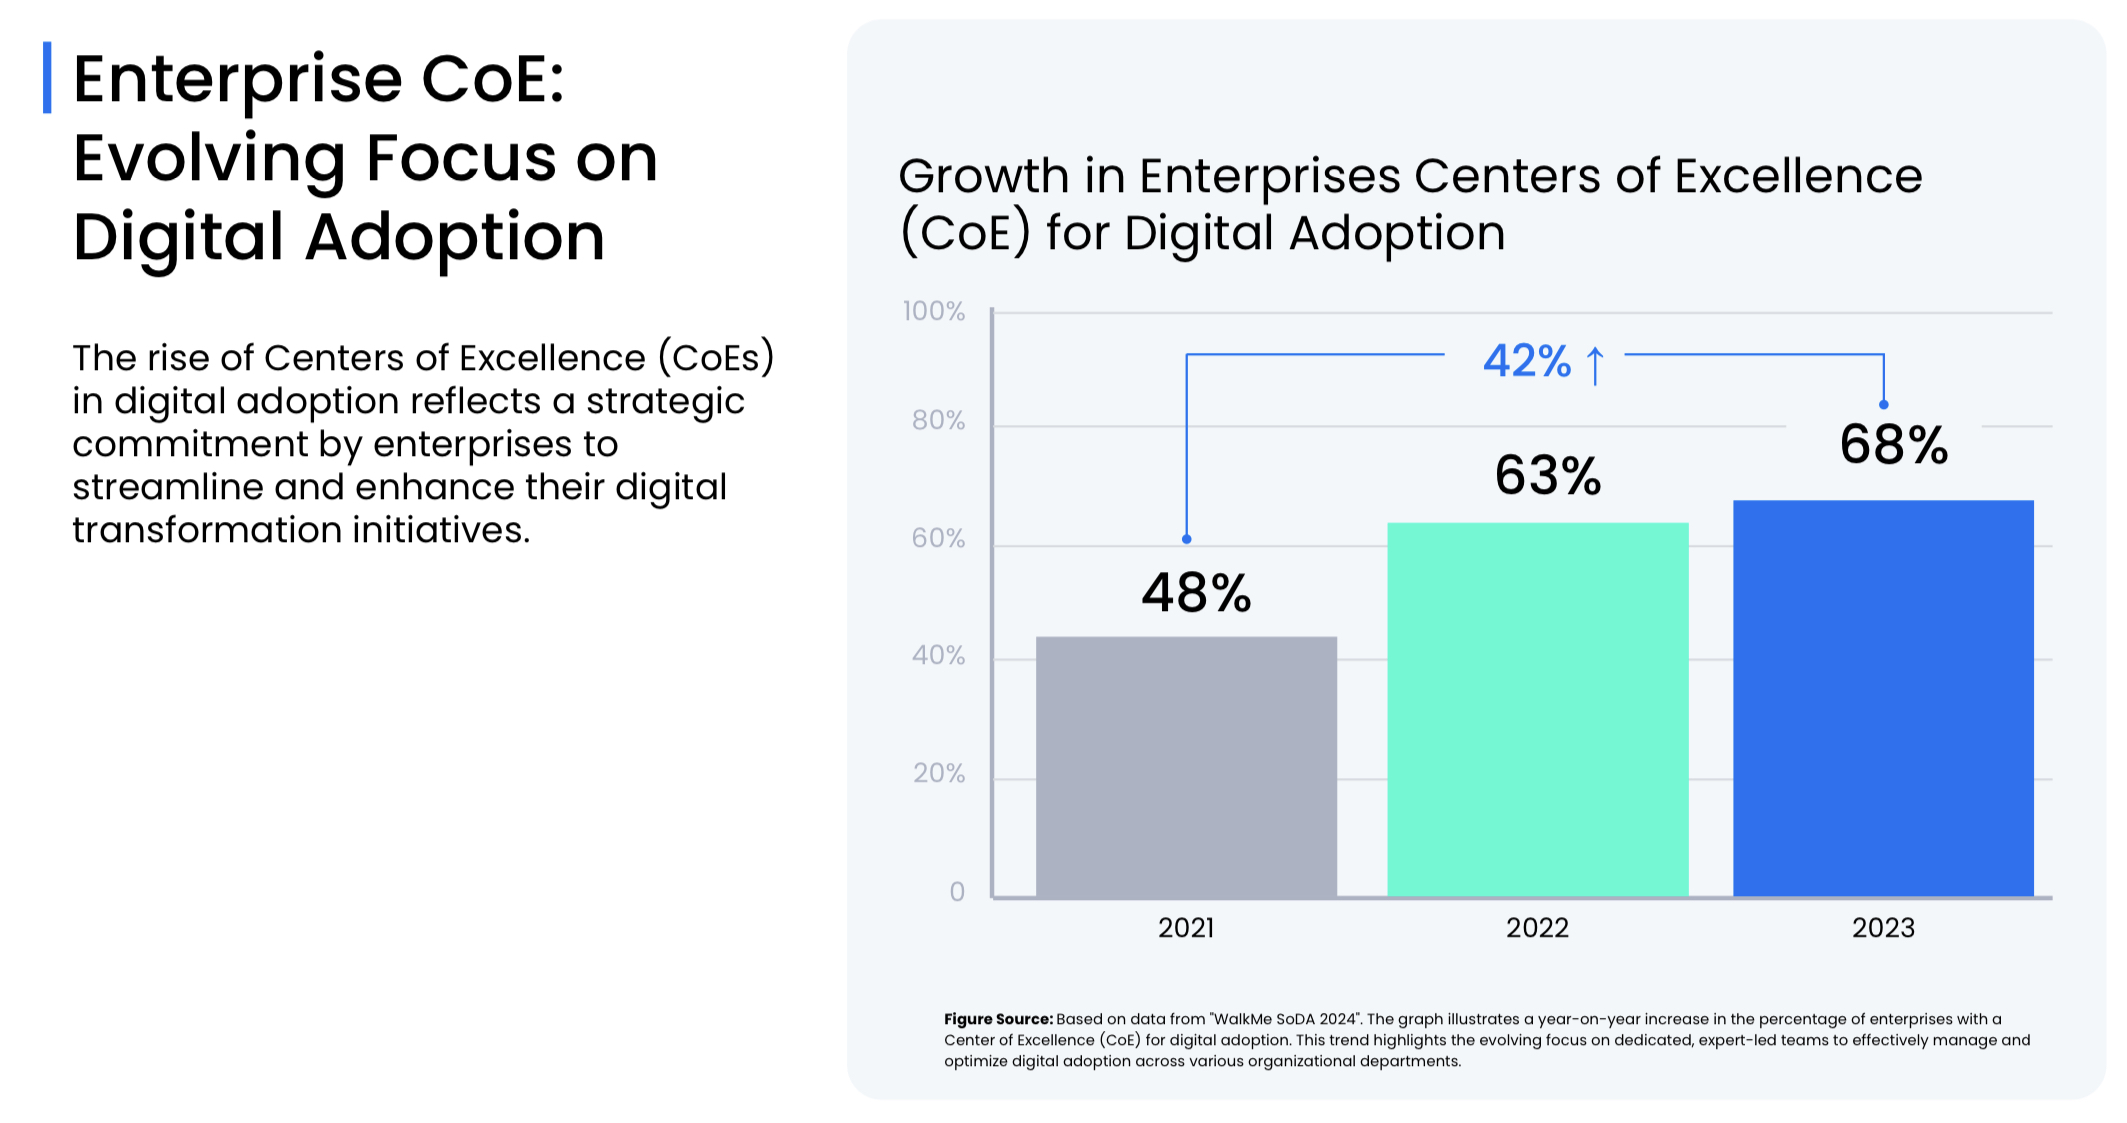 The growth of digital adoption CoEs.